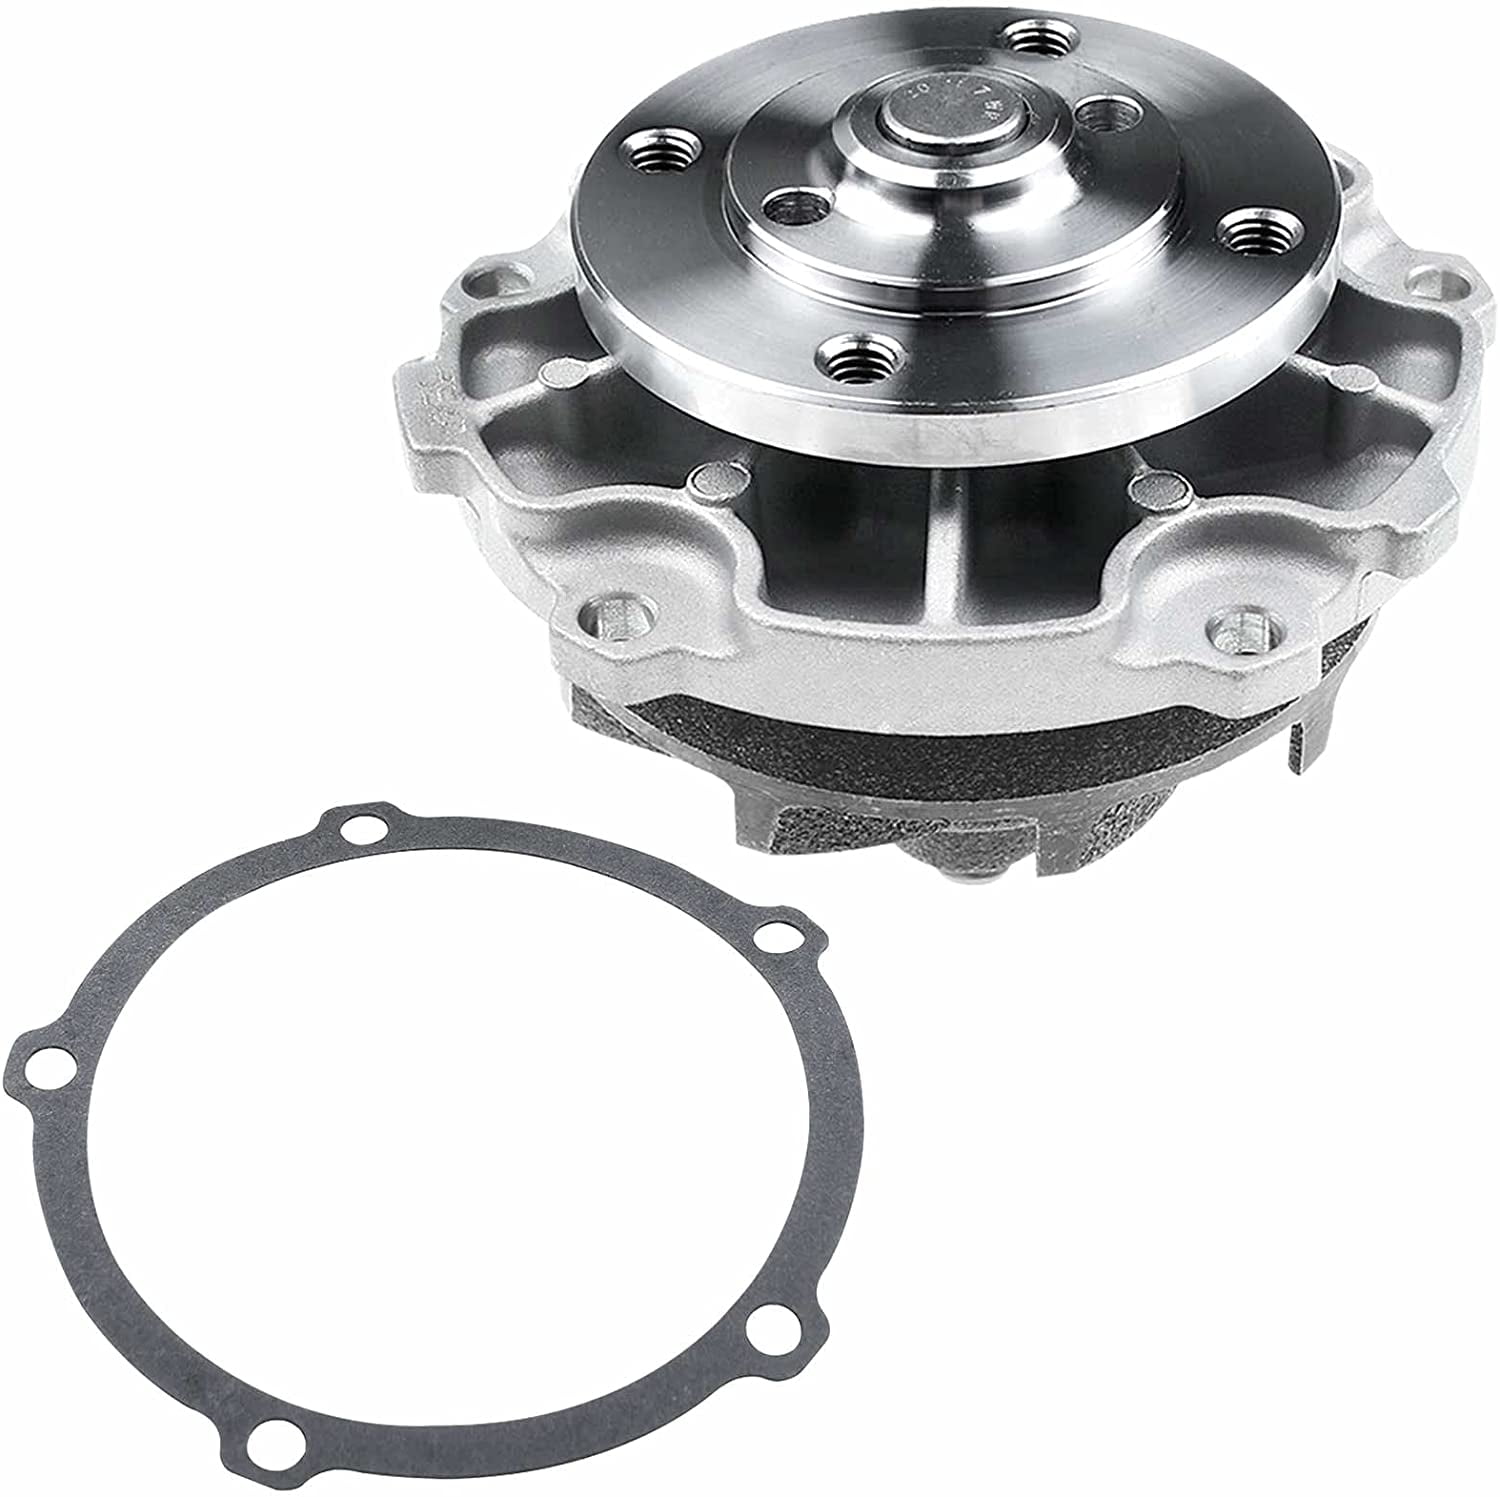 Coolant Water Pump With Gasket Bolts For GMC Chevy Buick Cadillac Saturn Pontiac 